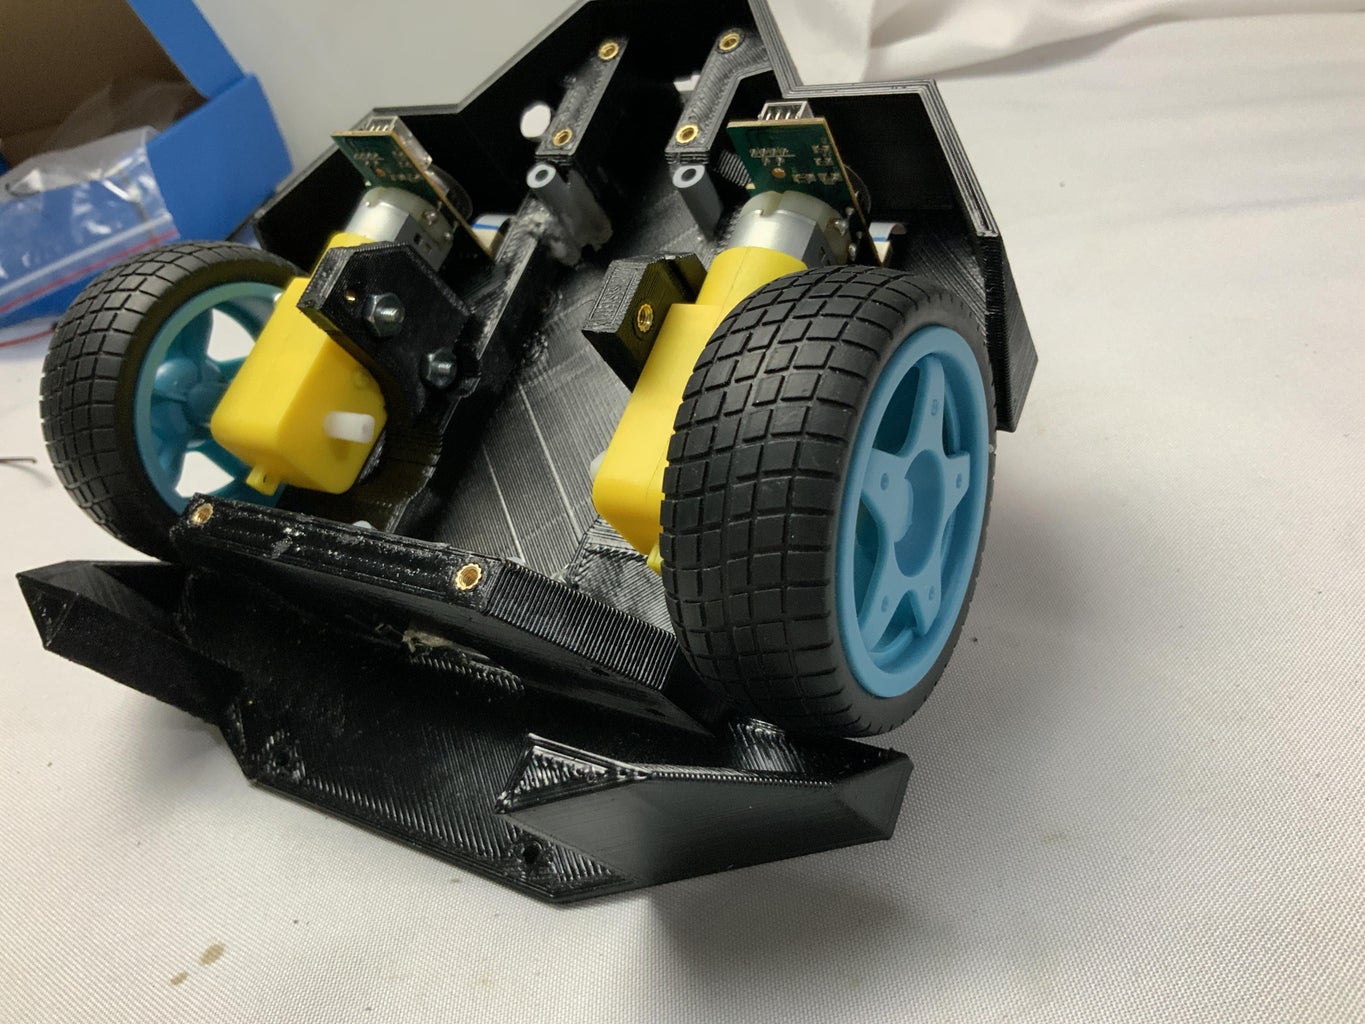 INSTALLATION OF MOTORS AND WHEELS